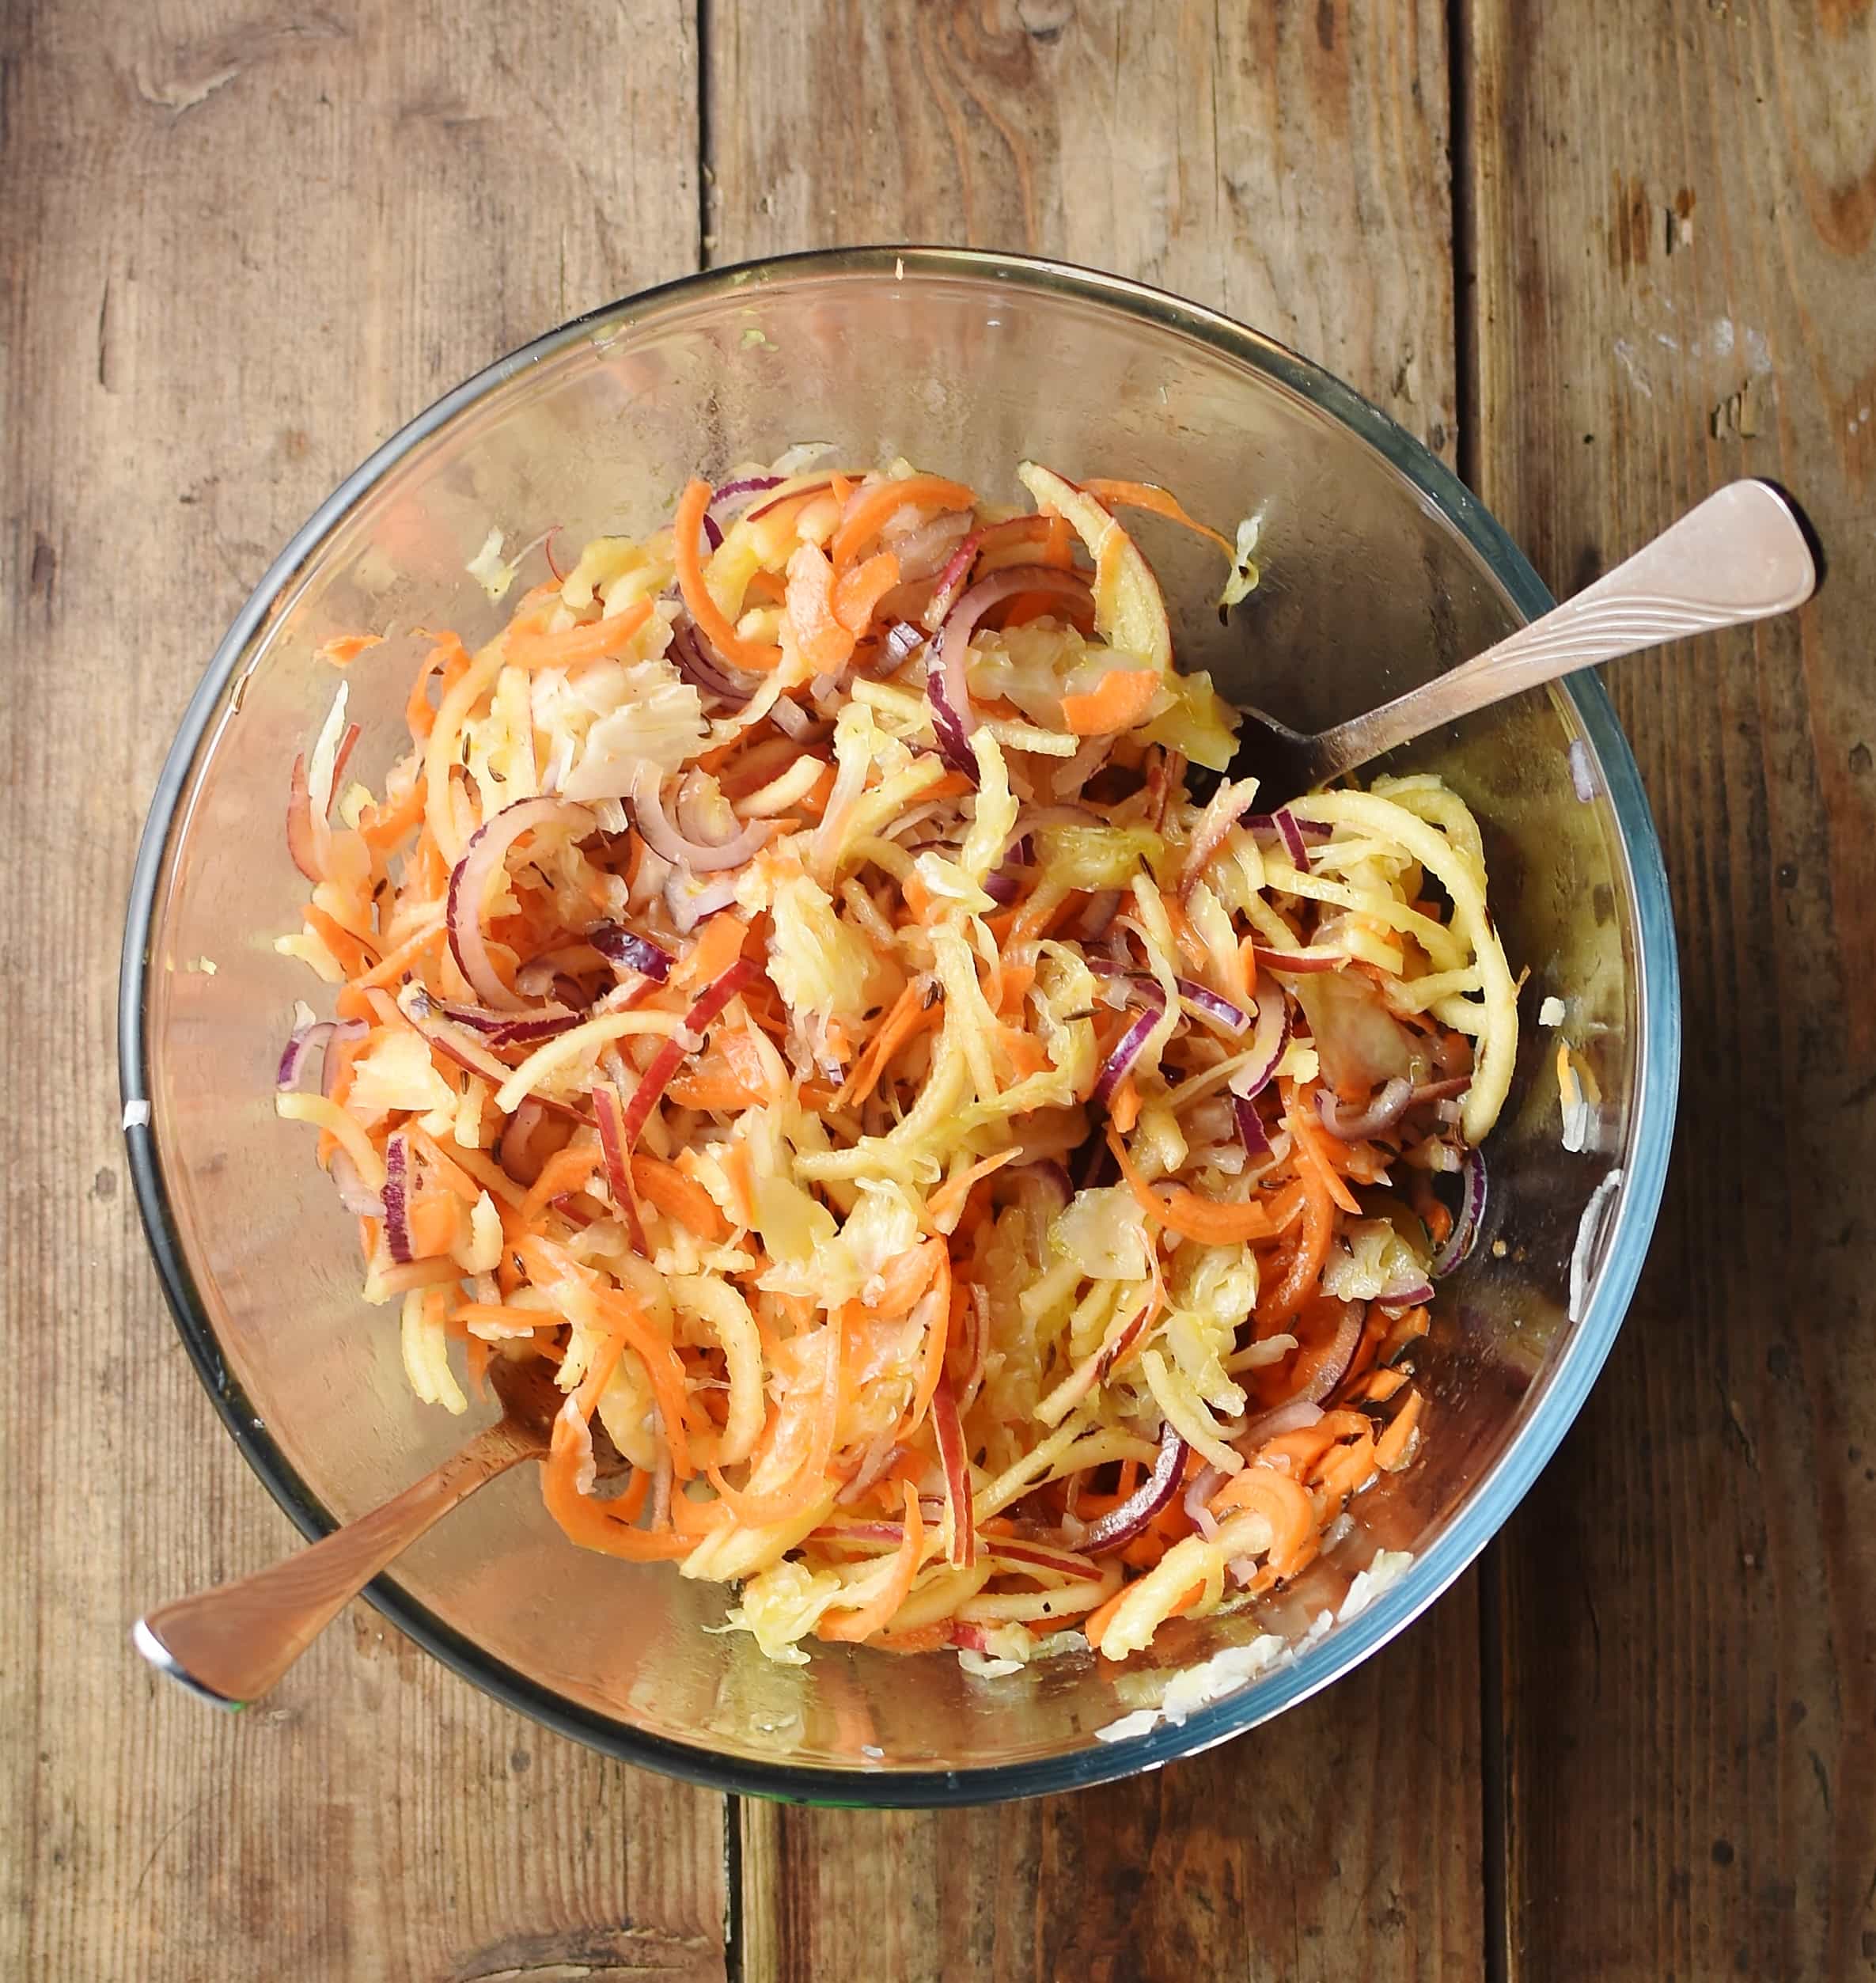 Sauerkraut, apple and carrot salad in mixing bowl with 2 forks.